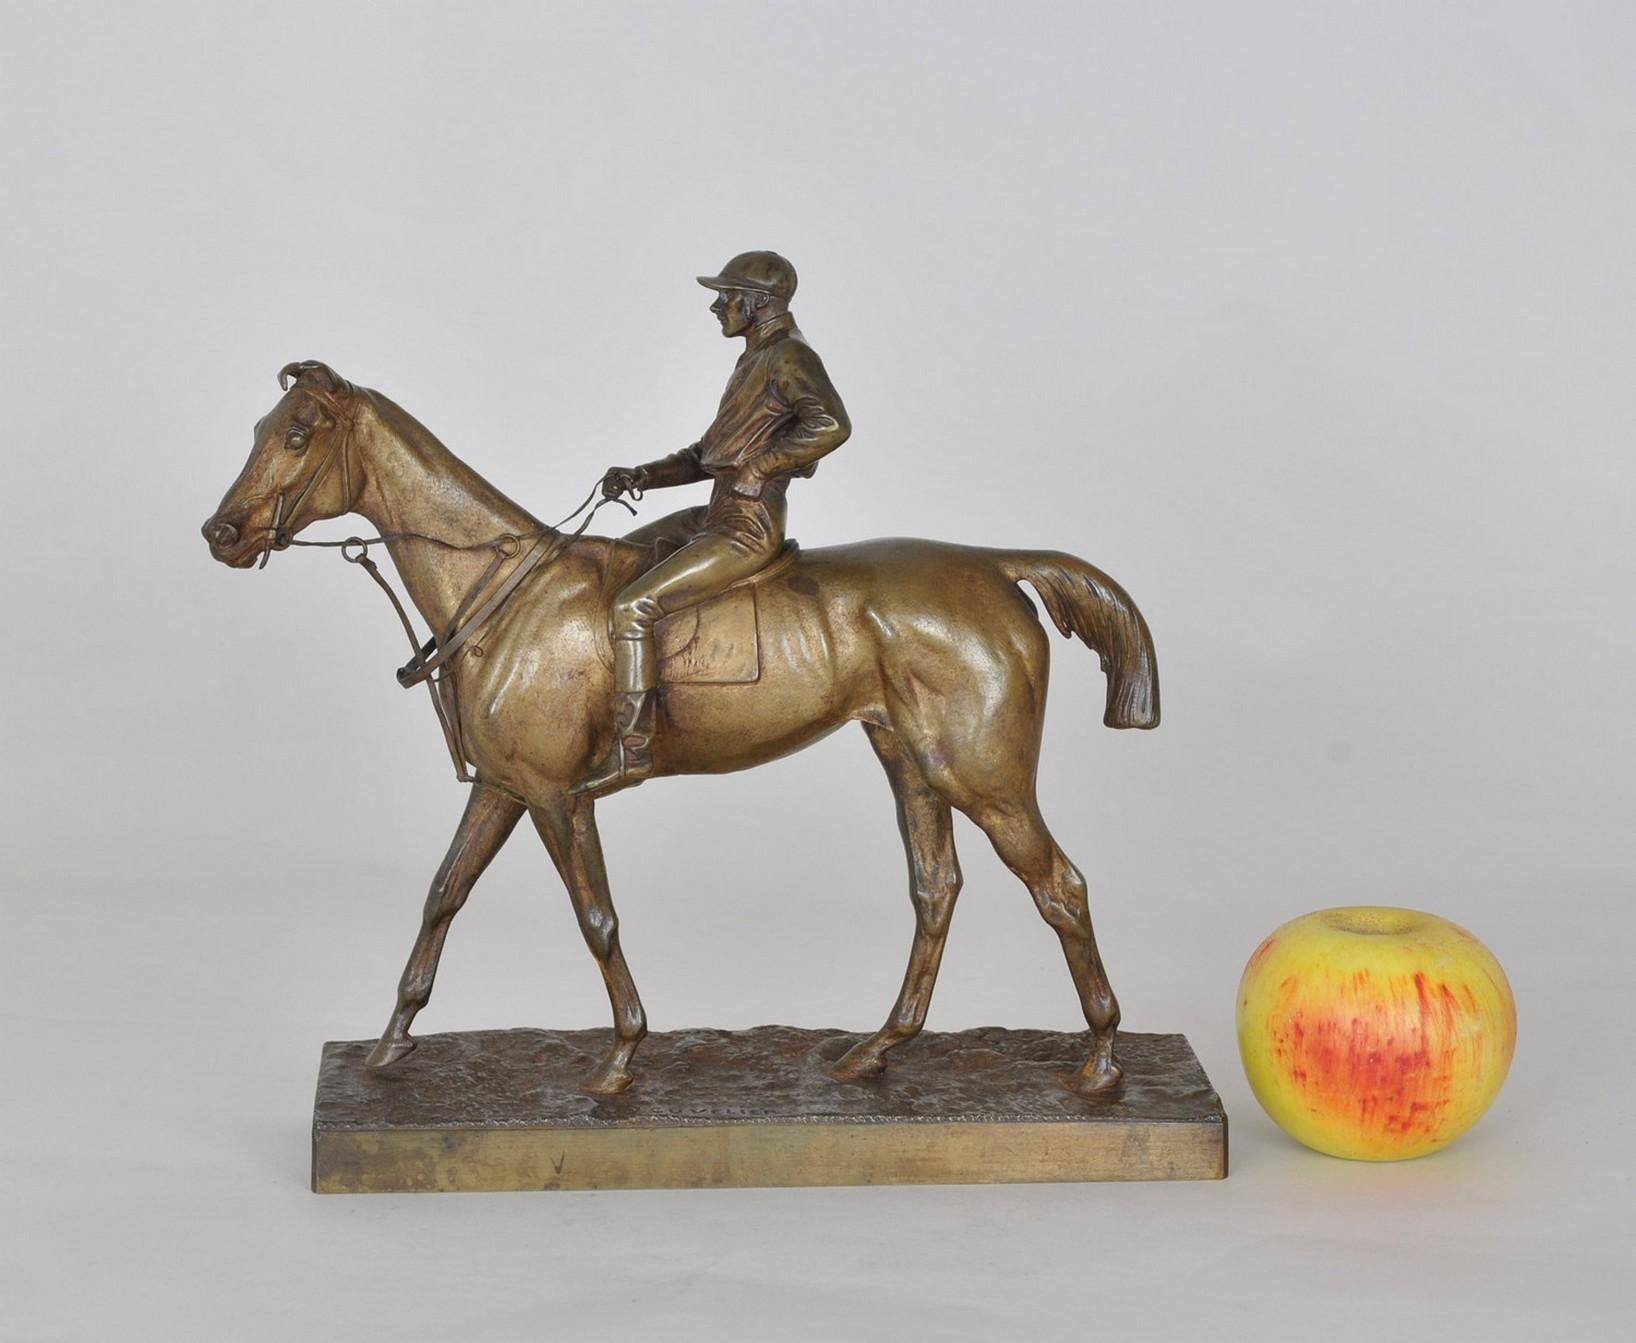 Bronze sculpture representing a horserider

Sculpture signed Cuvelier + signature of the Belgian founder 'H Luppens & Cie'

Patina of time

19th century

Measures: Height 26cm
25 x 7.5 cm.